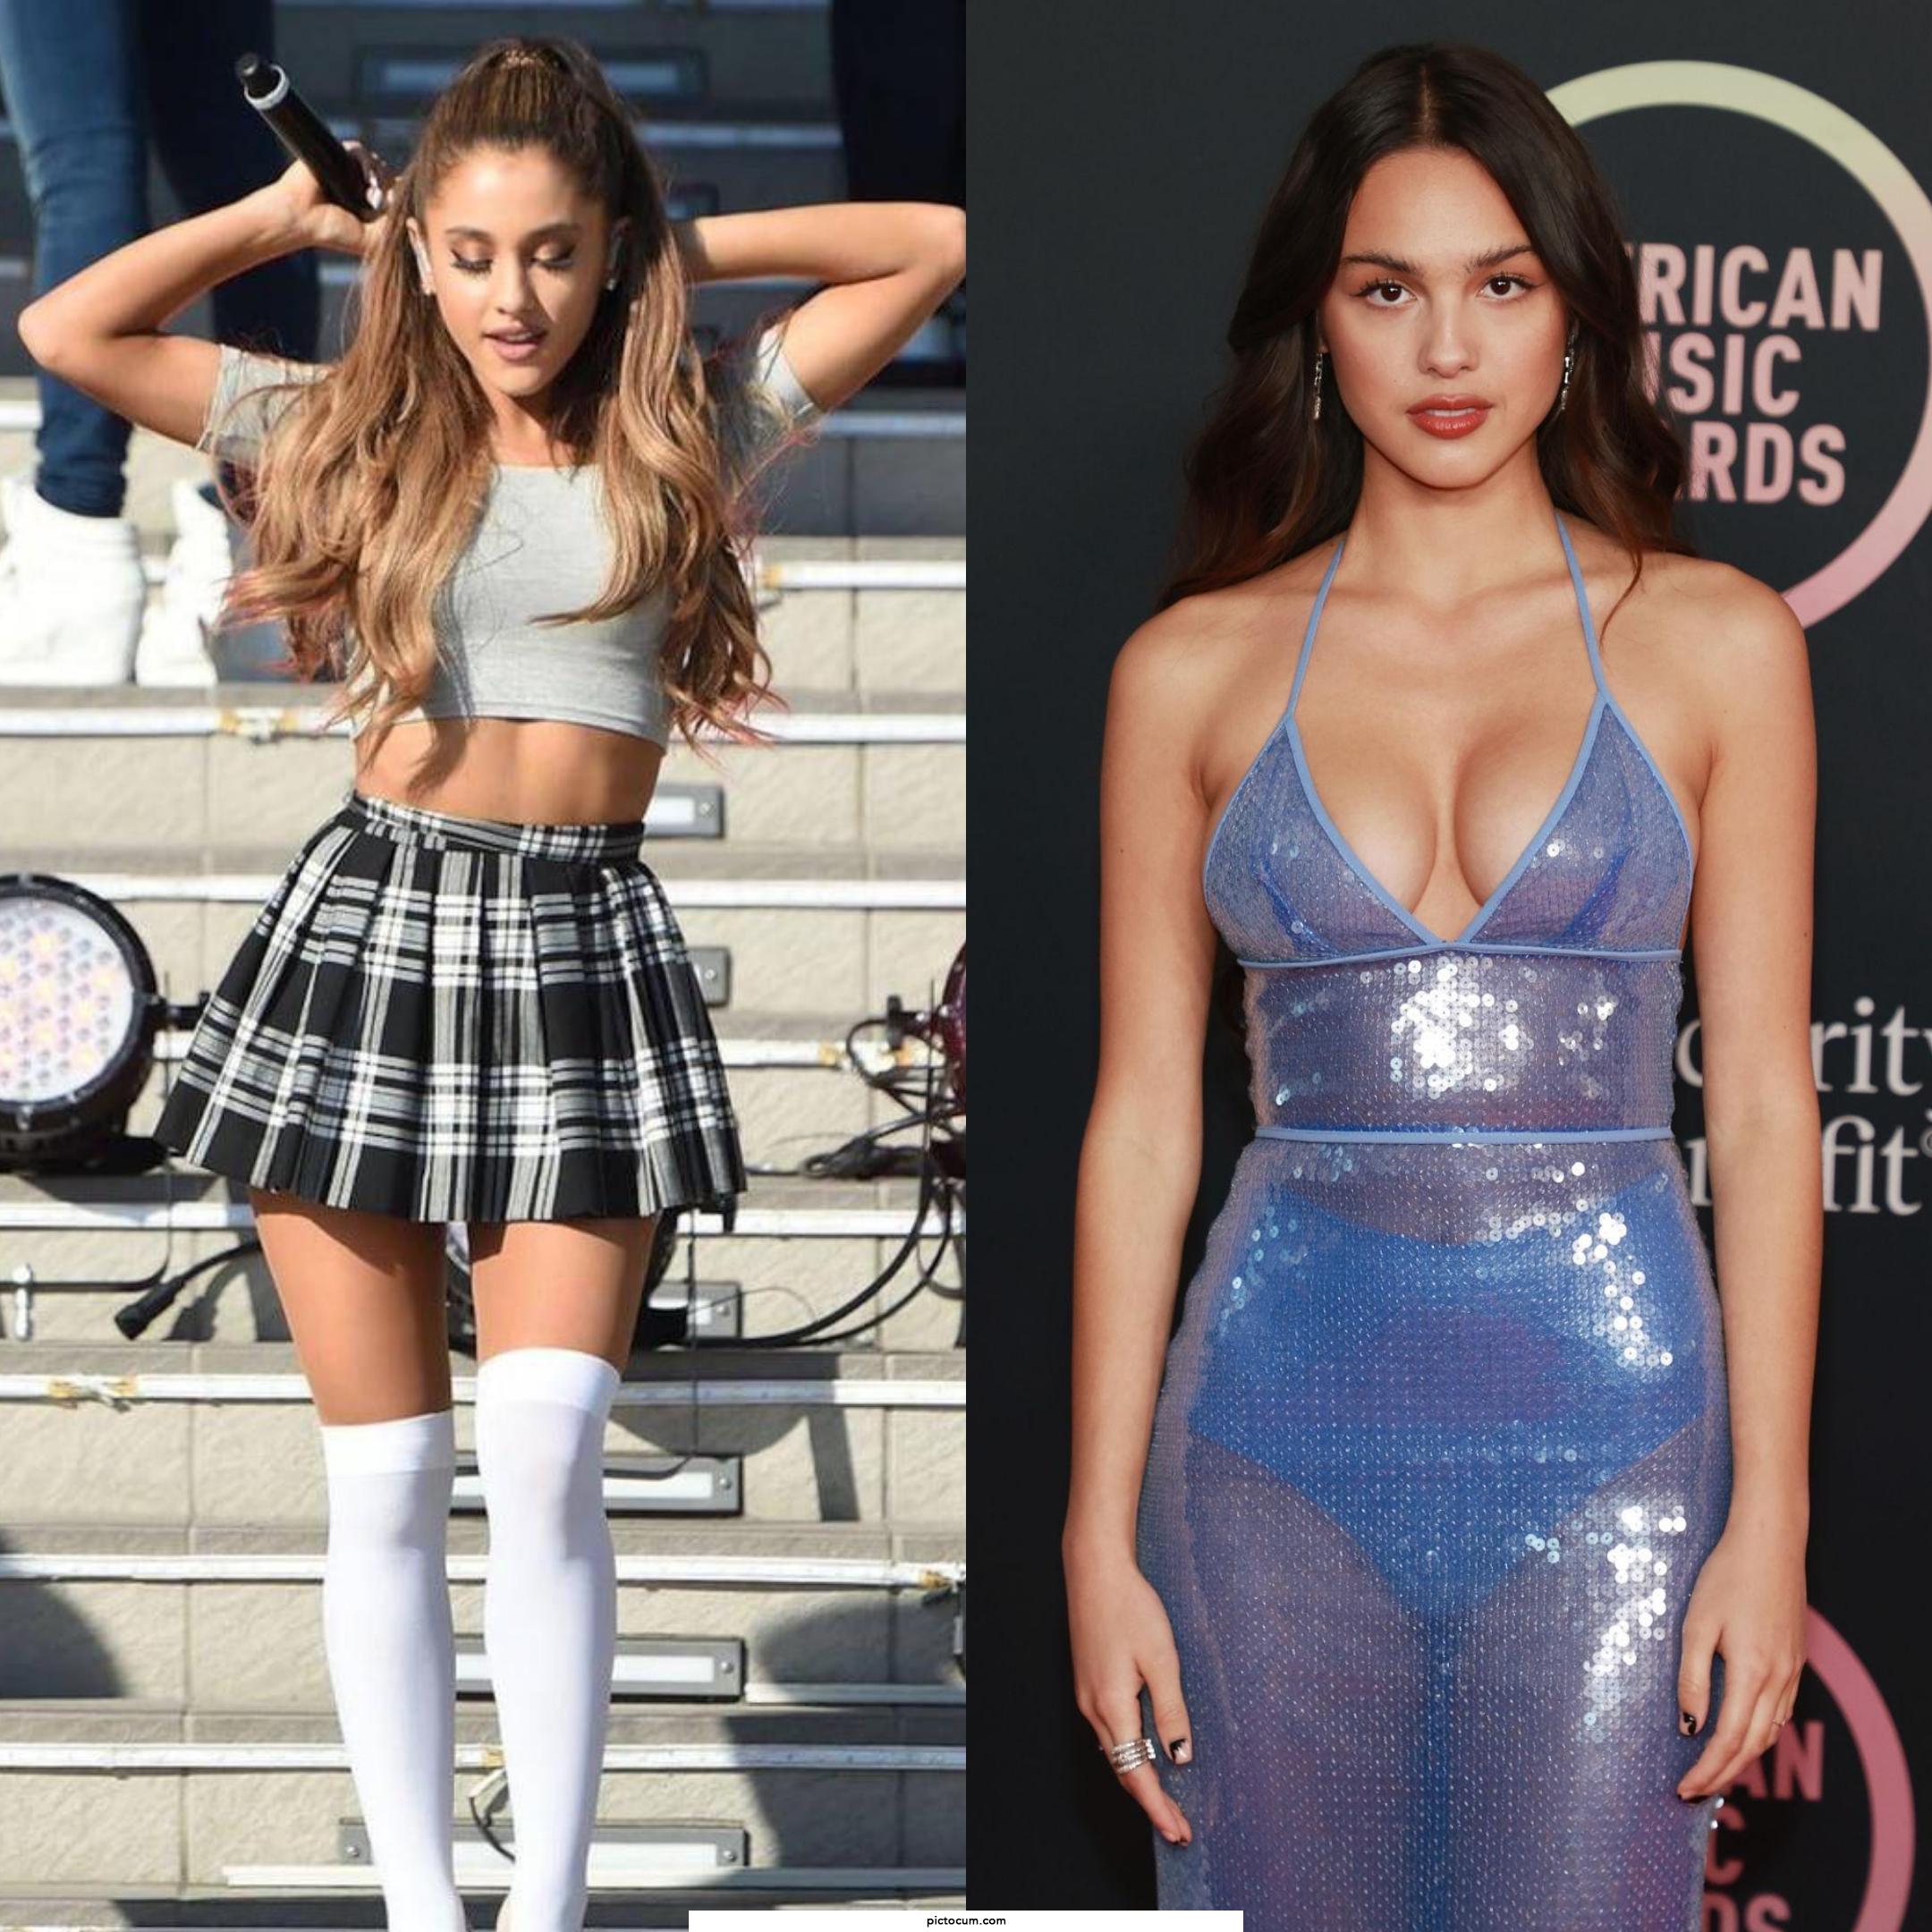 Now an even harder one.. Would you pound Ariana Grande until she can't walk or gangbang Olivia Rodrigo? 👀